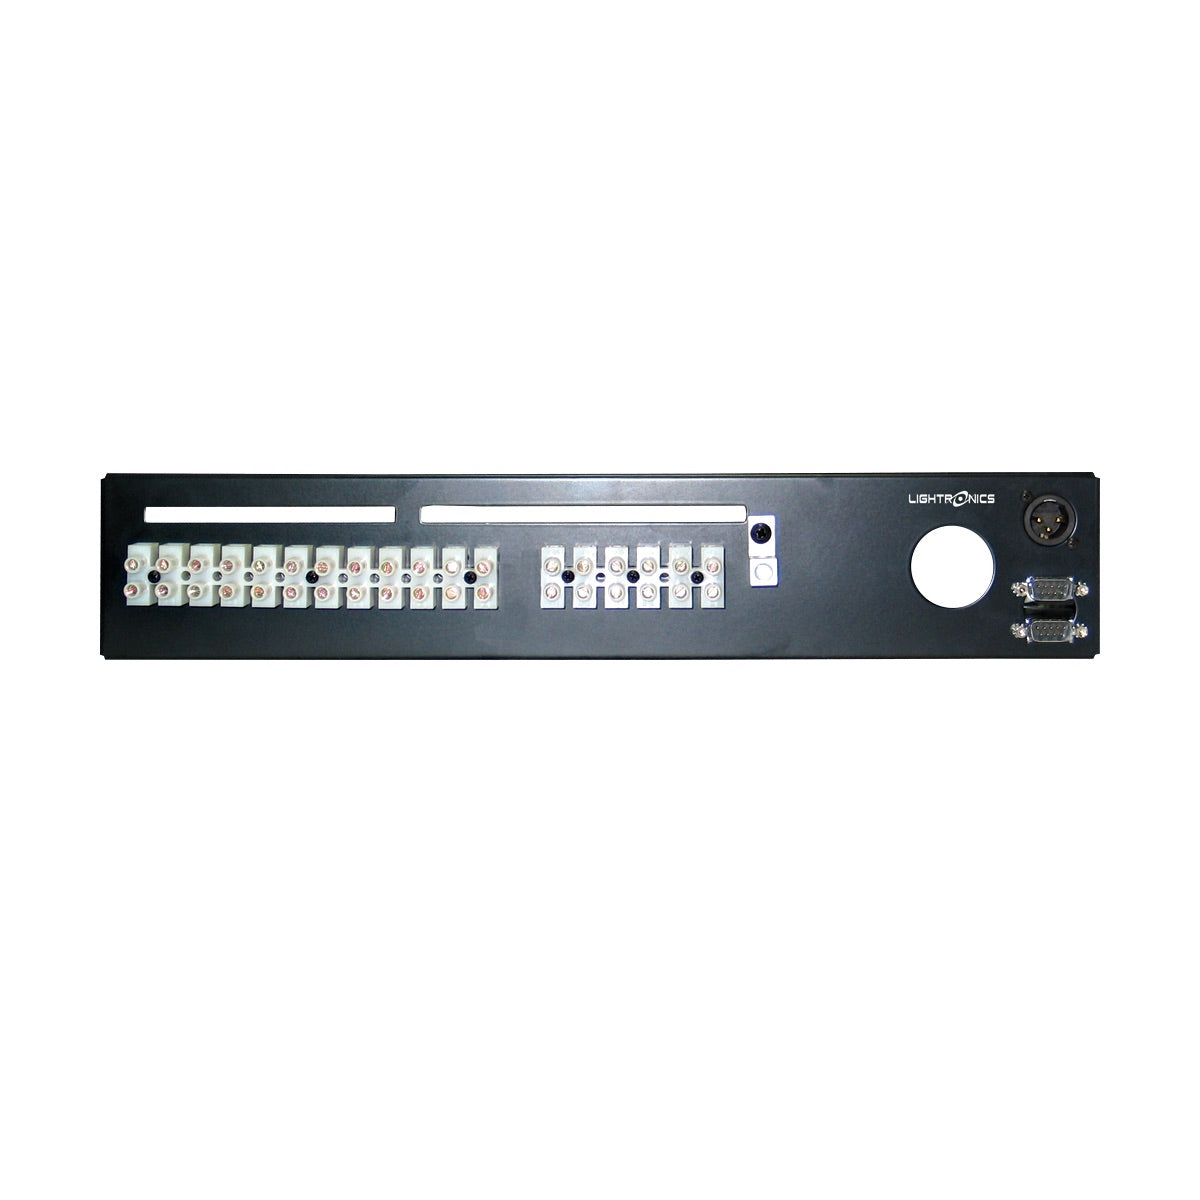 Lightronics RA122 Rack Mount Dimmer, RA Series, rear Terminal/Barrier Connector Strip with Knockout Cover